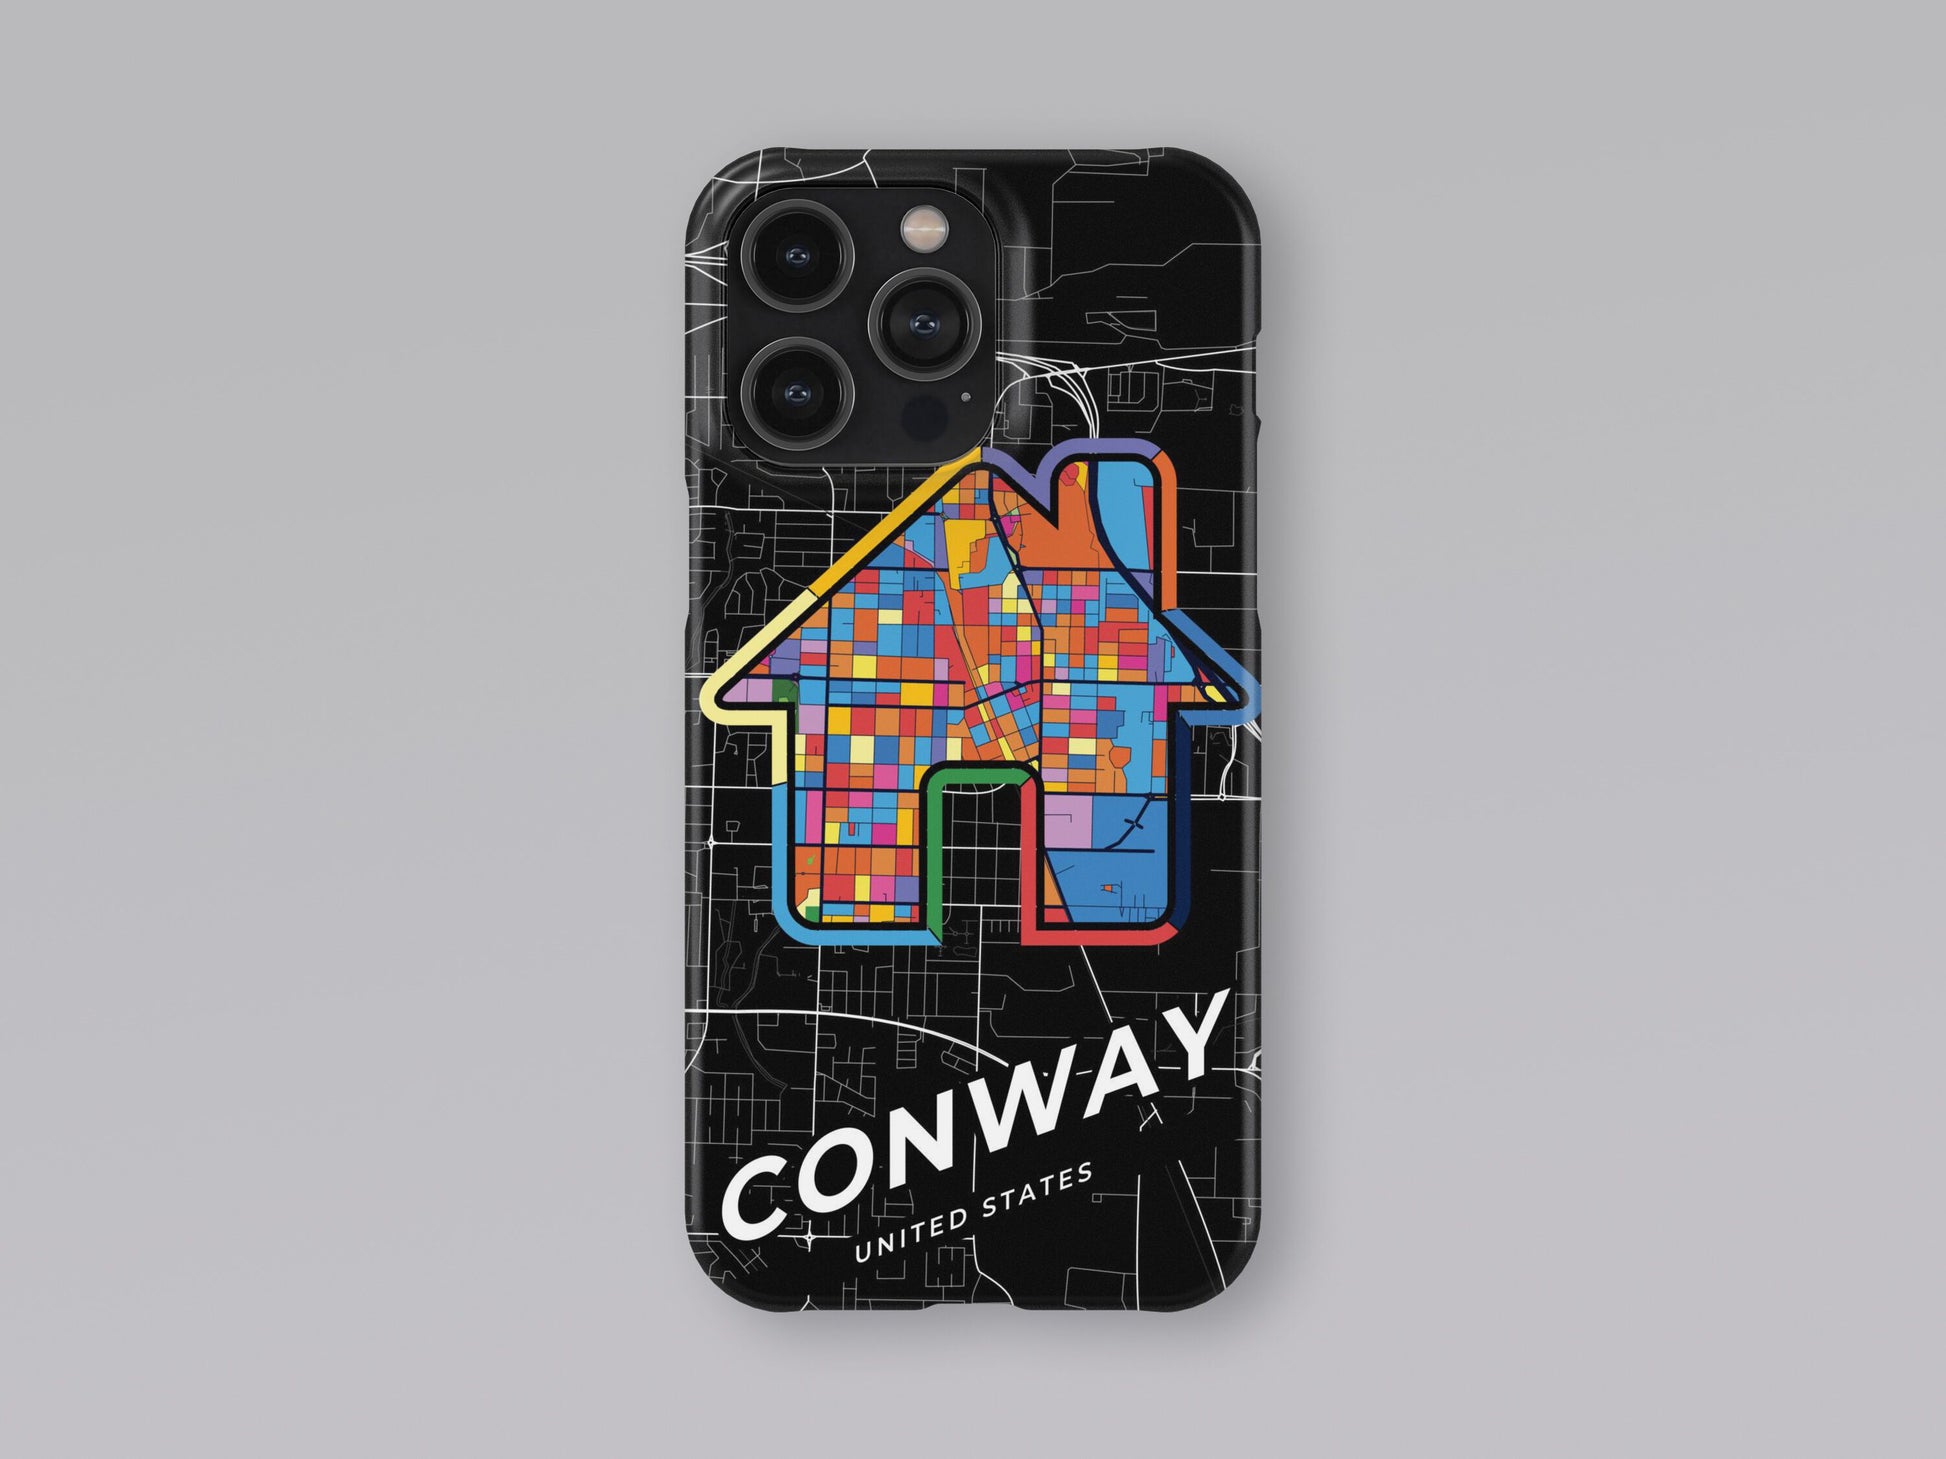 Conway Arkansas slim phone case with colorful icon. Birthday, wedding or housewarming gift. Couple match cases. 3